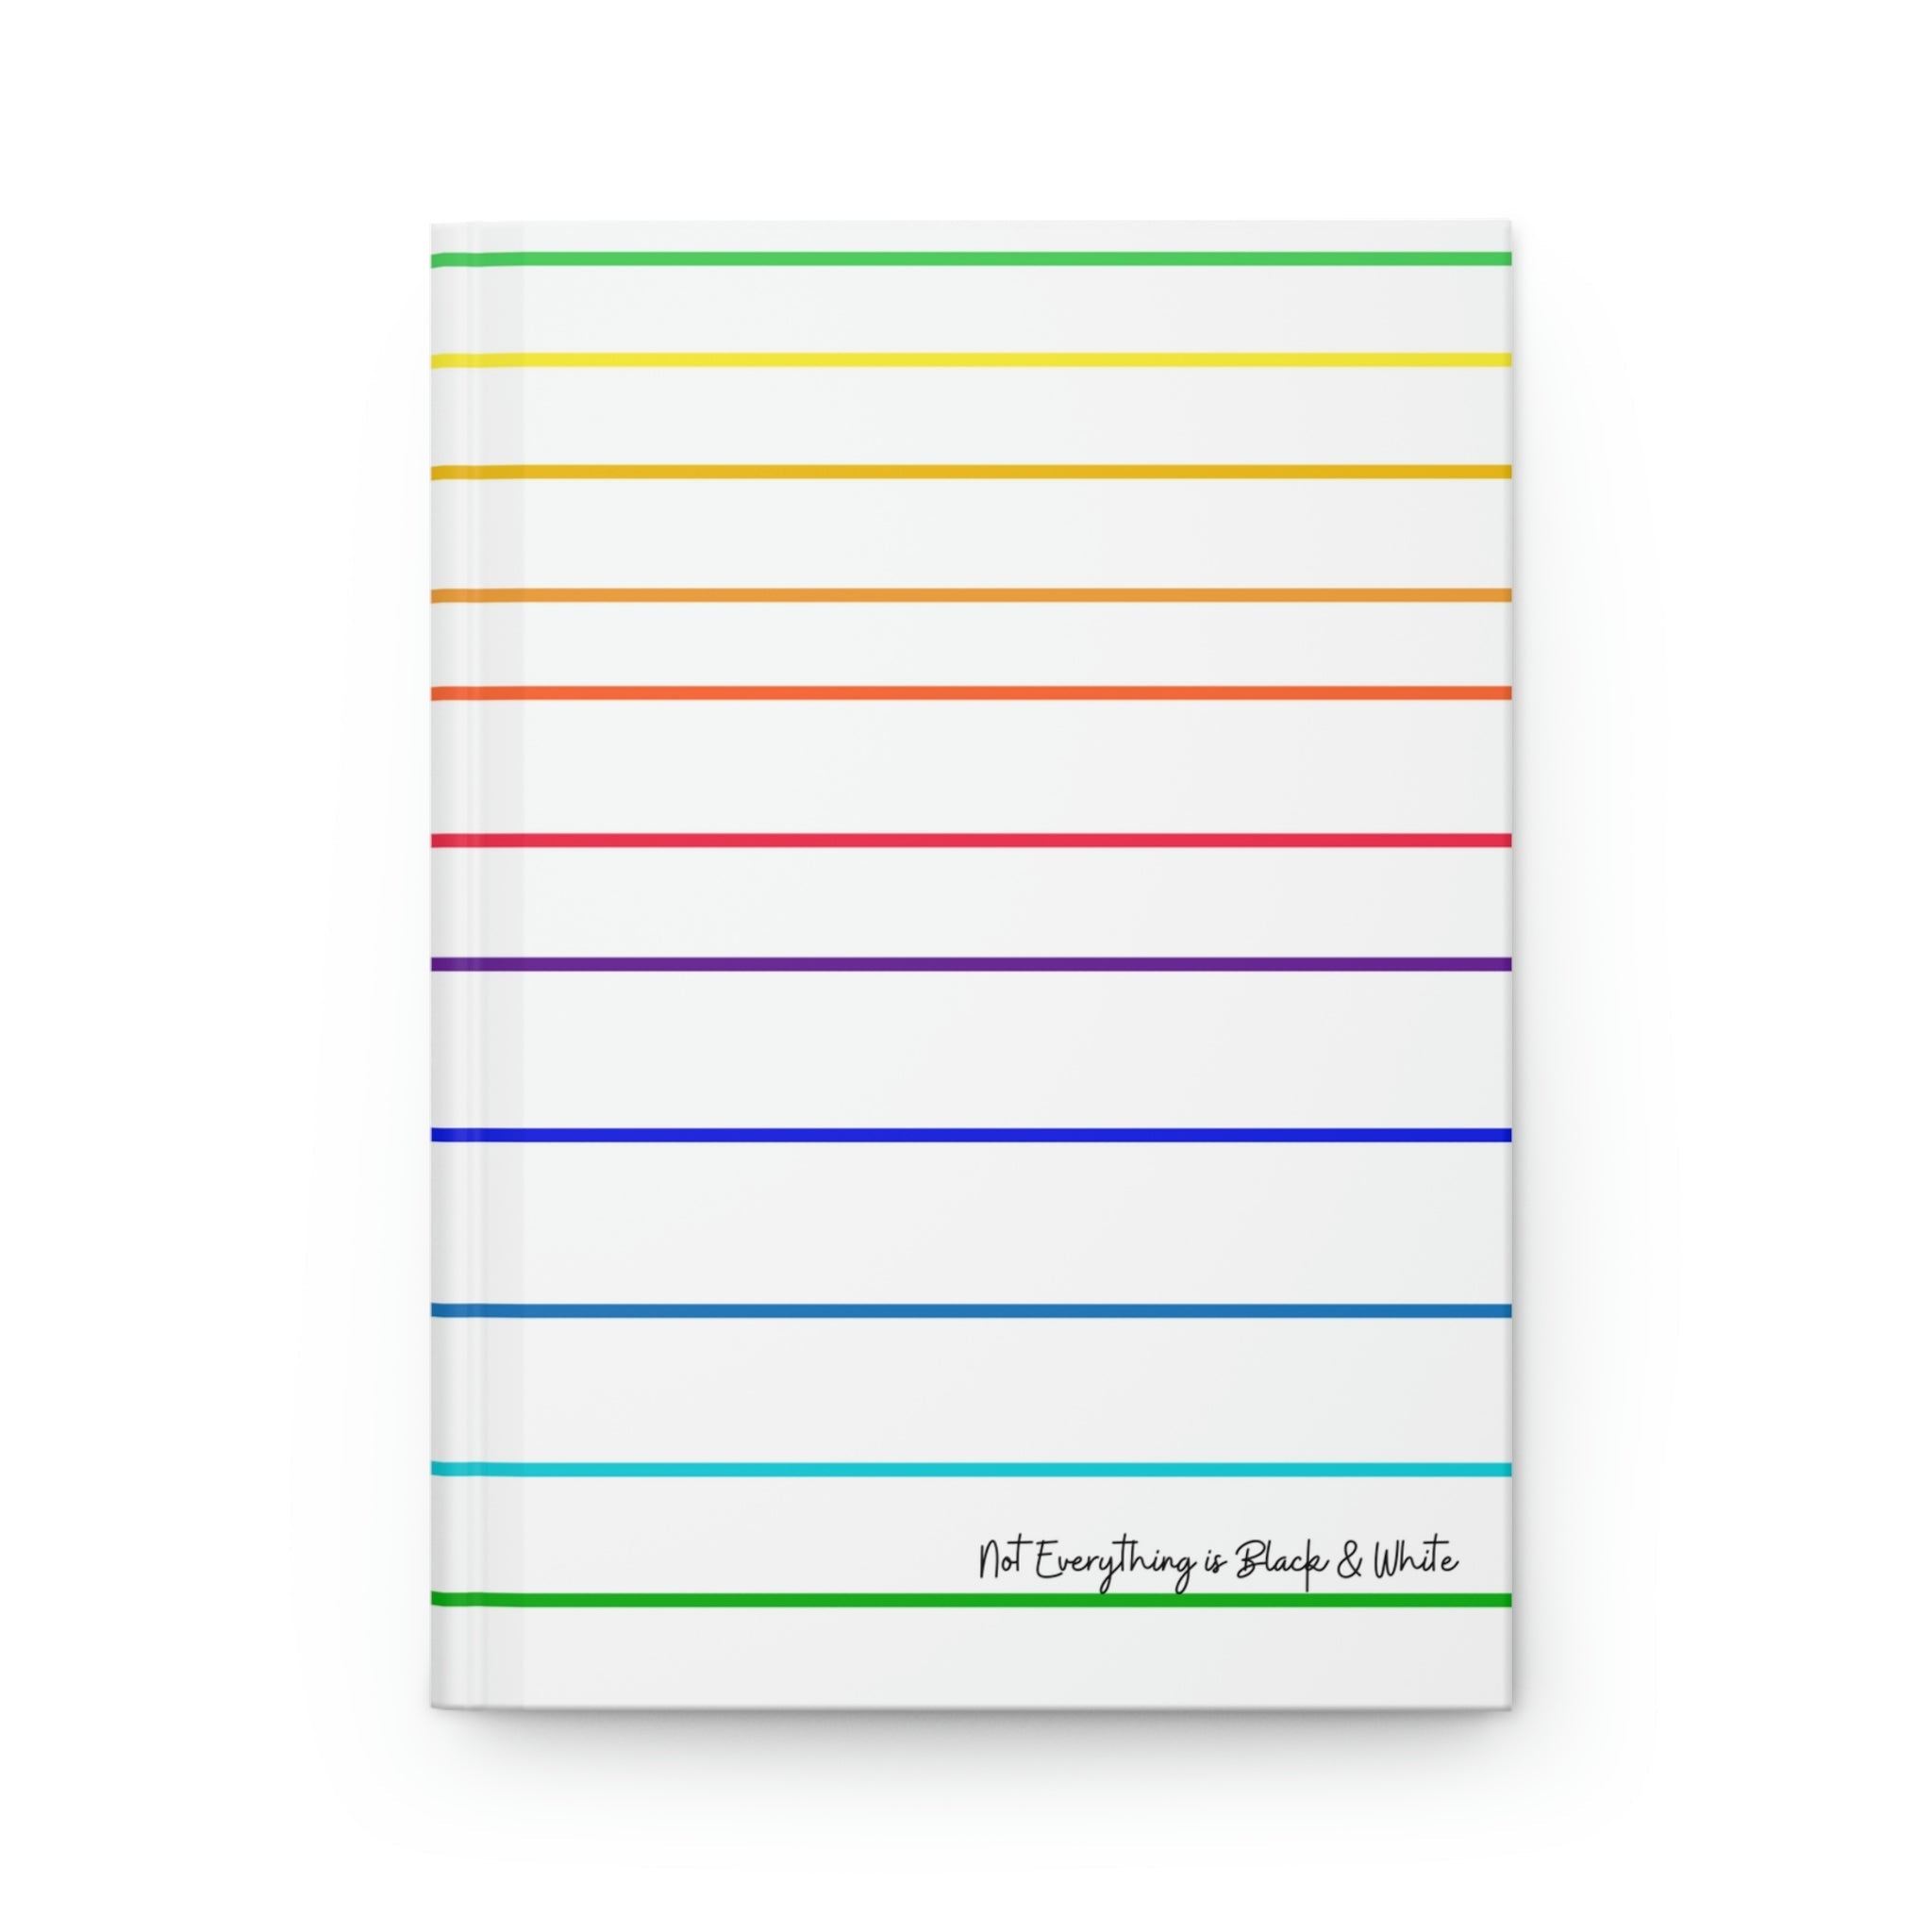 Not Everything Is Black & White Hardcover Matte Journal - The Kindness Cause